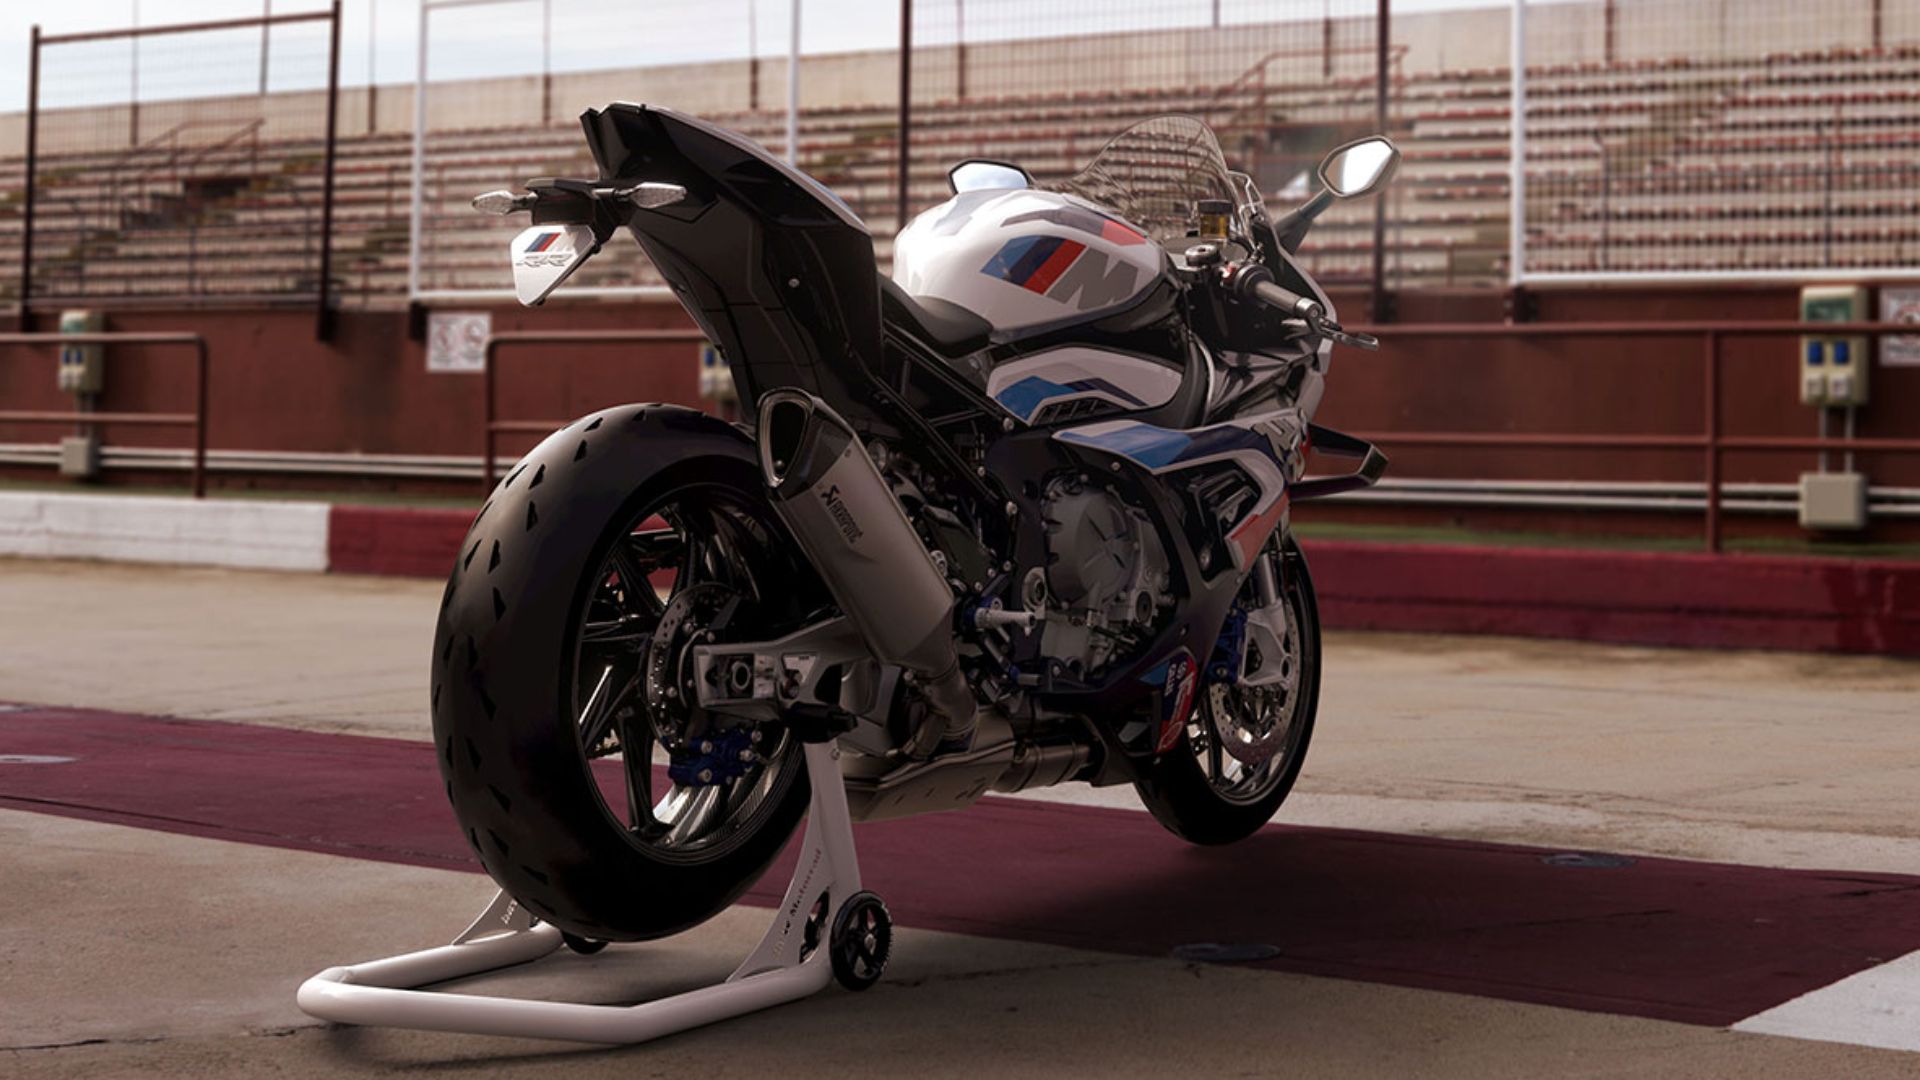 Static shot of the BMW M 1000 RR from the rear